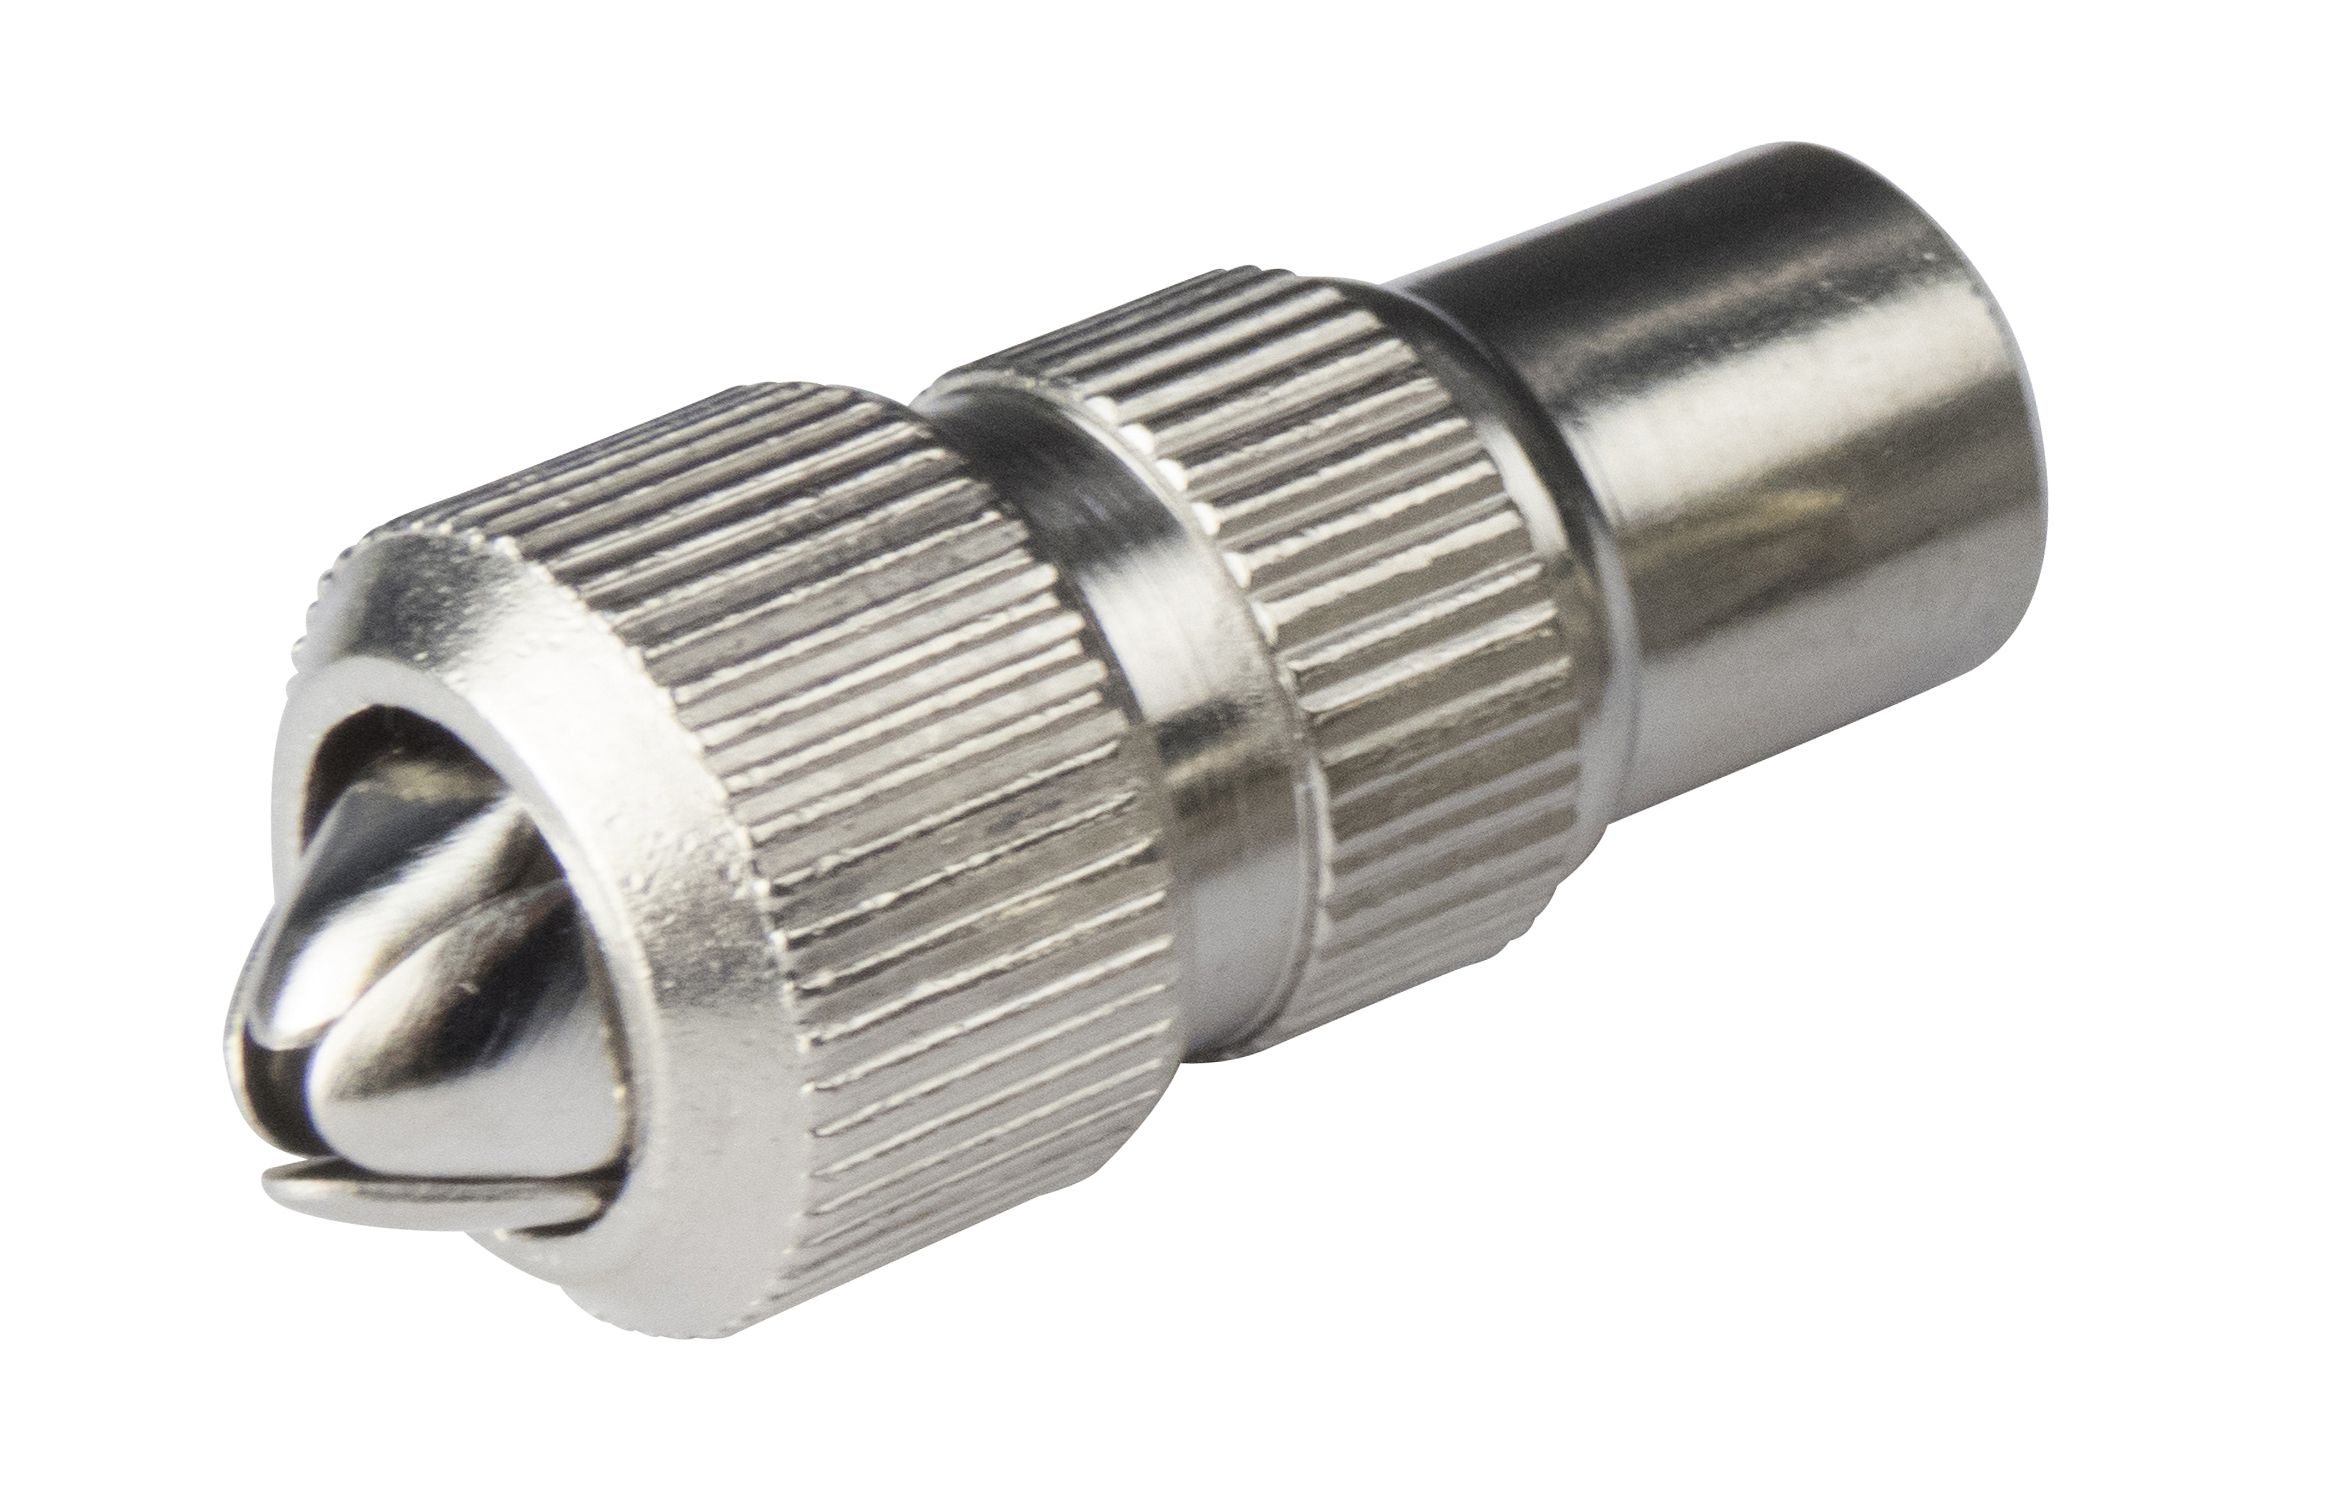 SLX Coaxial connector, Pack of 10 13mm